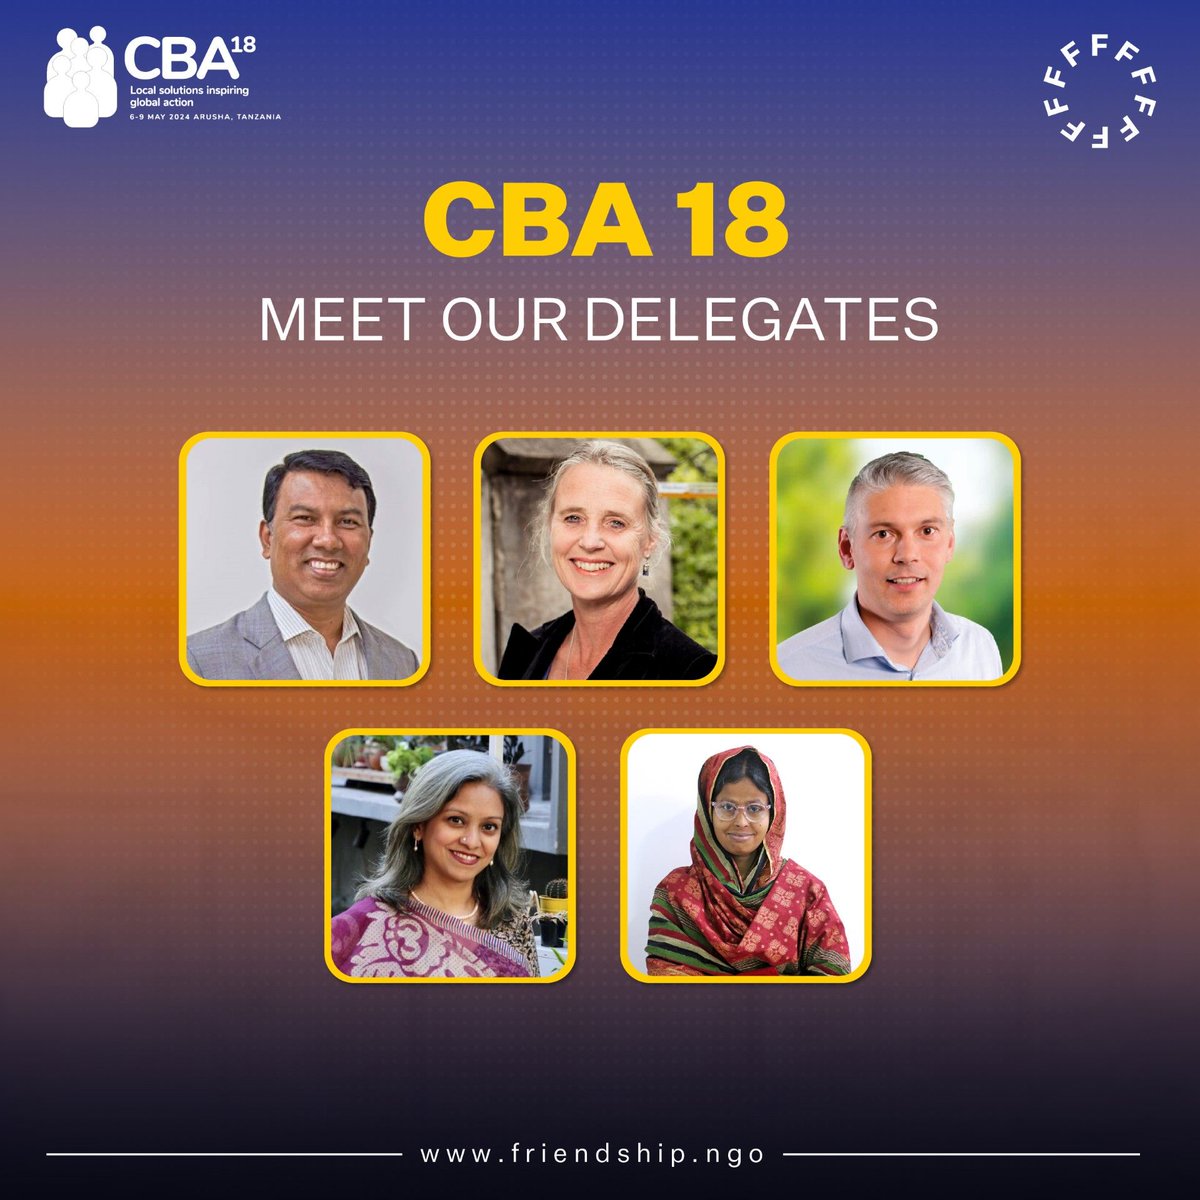 Introducing our delegates at #CBA18 whose deep commitment to community-driven approaches to climate adaptation will be at the forefront, showcasing our efforts to empower local voices and promote sustainable change.

#LocalAdaptation #ClimateActivism #LLA #climateyouth #SDG13